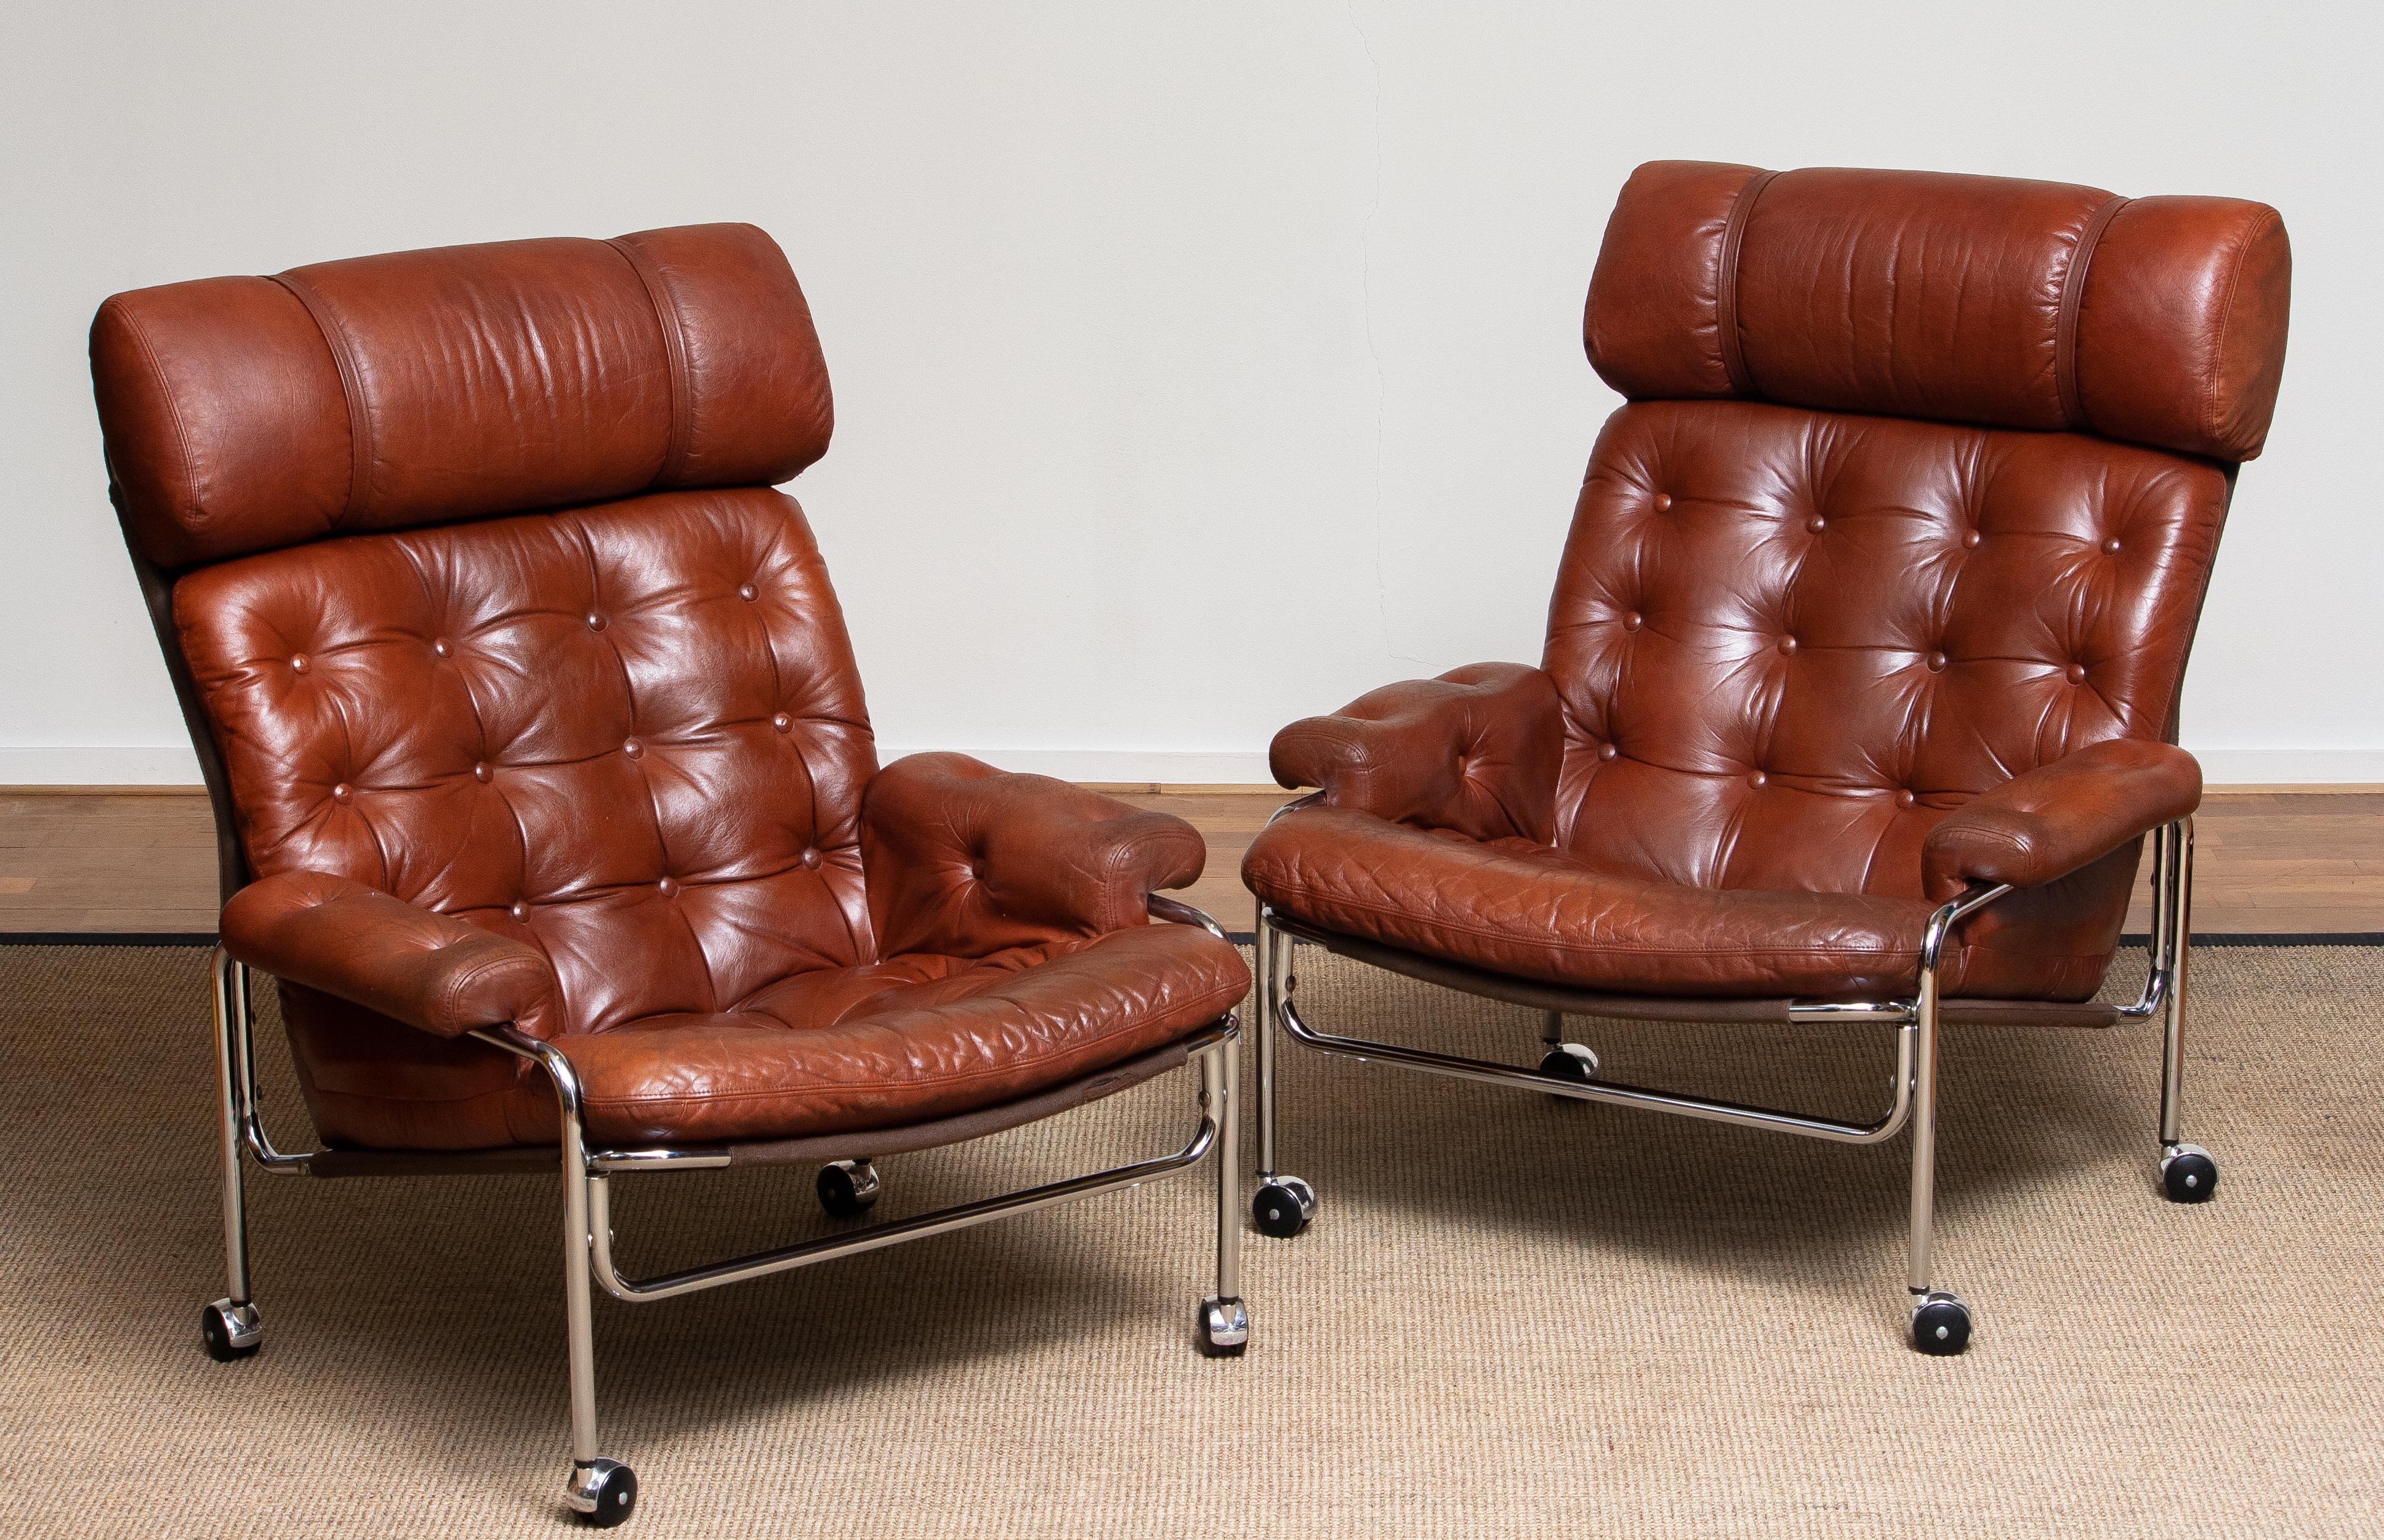 Beautiful set of two lounge / easy chair in aged brown / cognac leather and chrome designed by Pethrus Lindlöfs for A.B. Lindlöfs Möbler Lammhult, Sweden. 
The aged leather on both chairs gives them there typical vintage character. The leather is